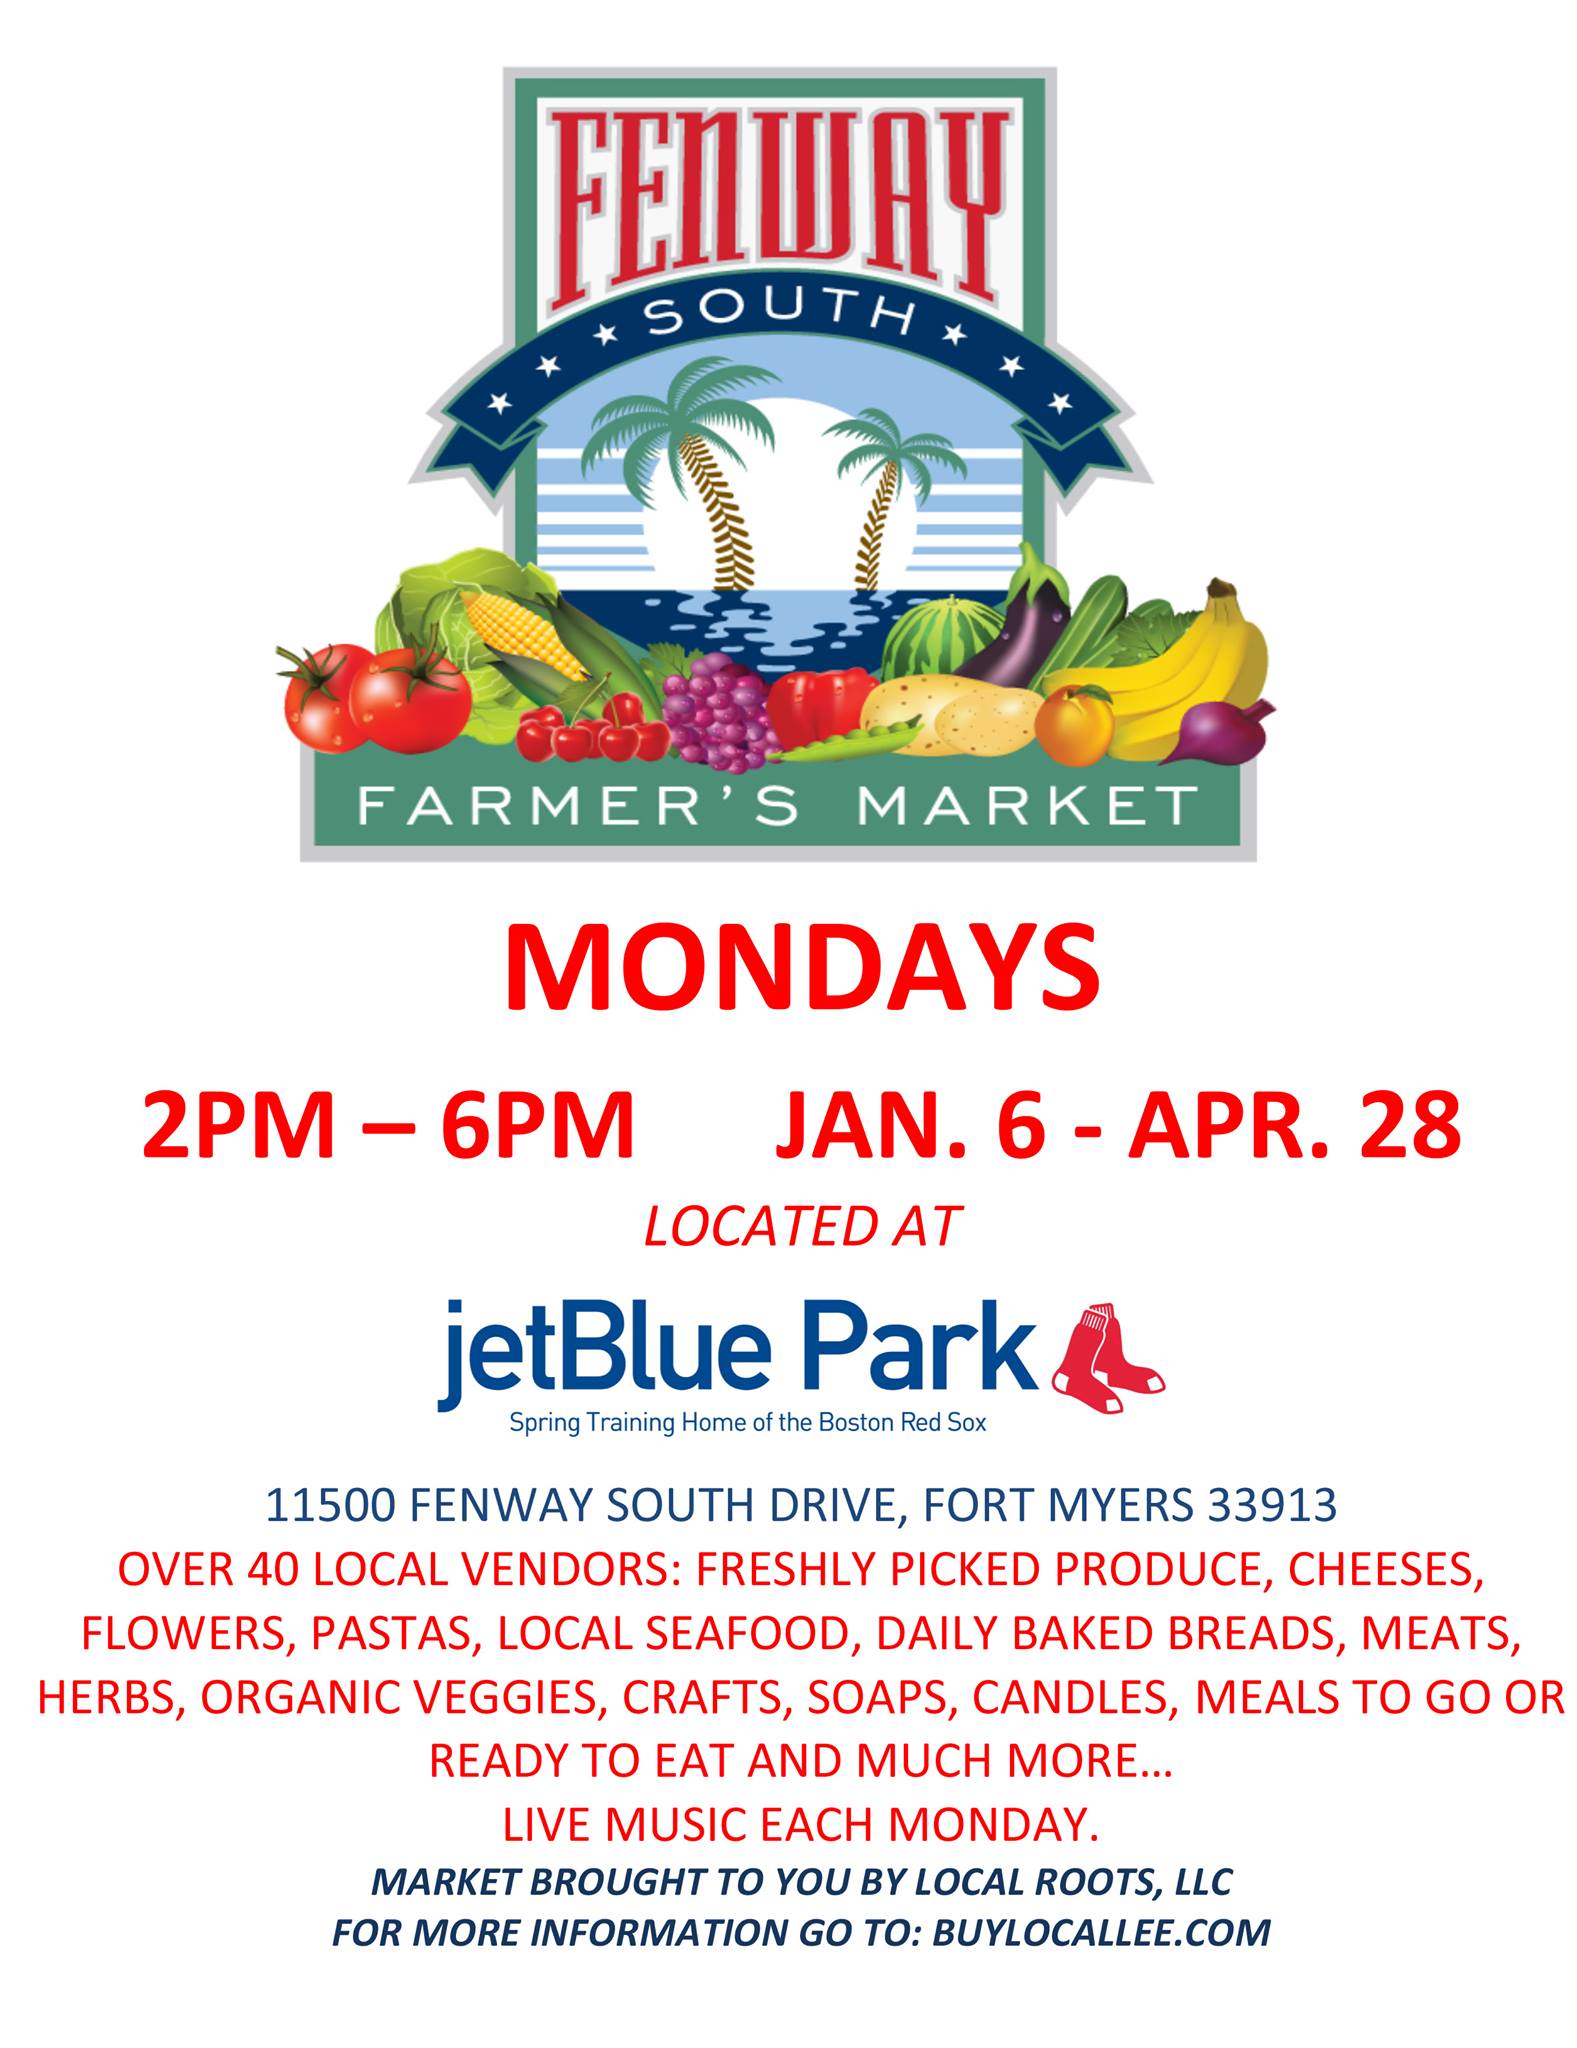 Fenway South Farmer's Market at JetBlue Park Continues through April 28th, 12PM to 4PM